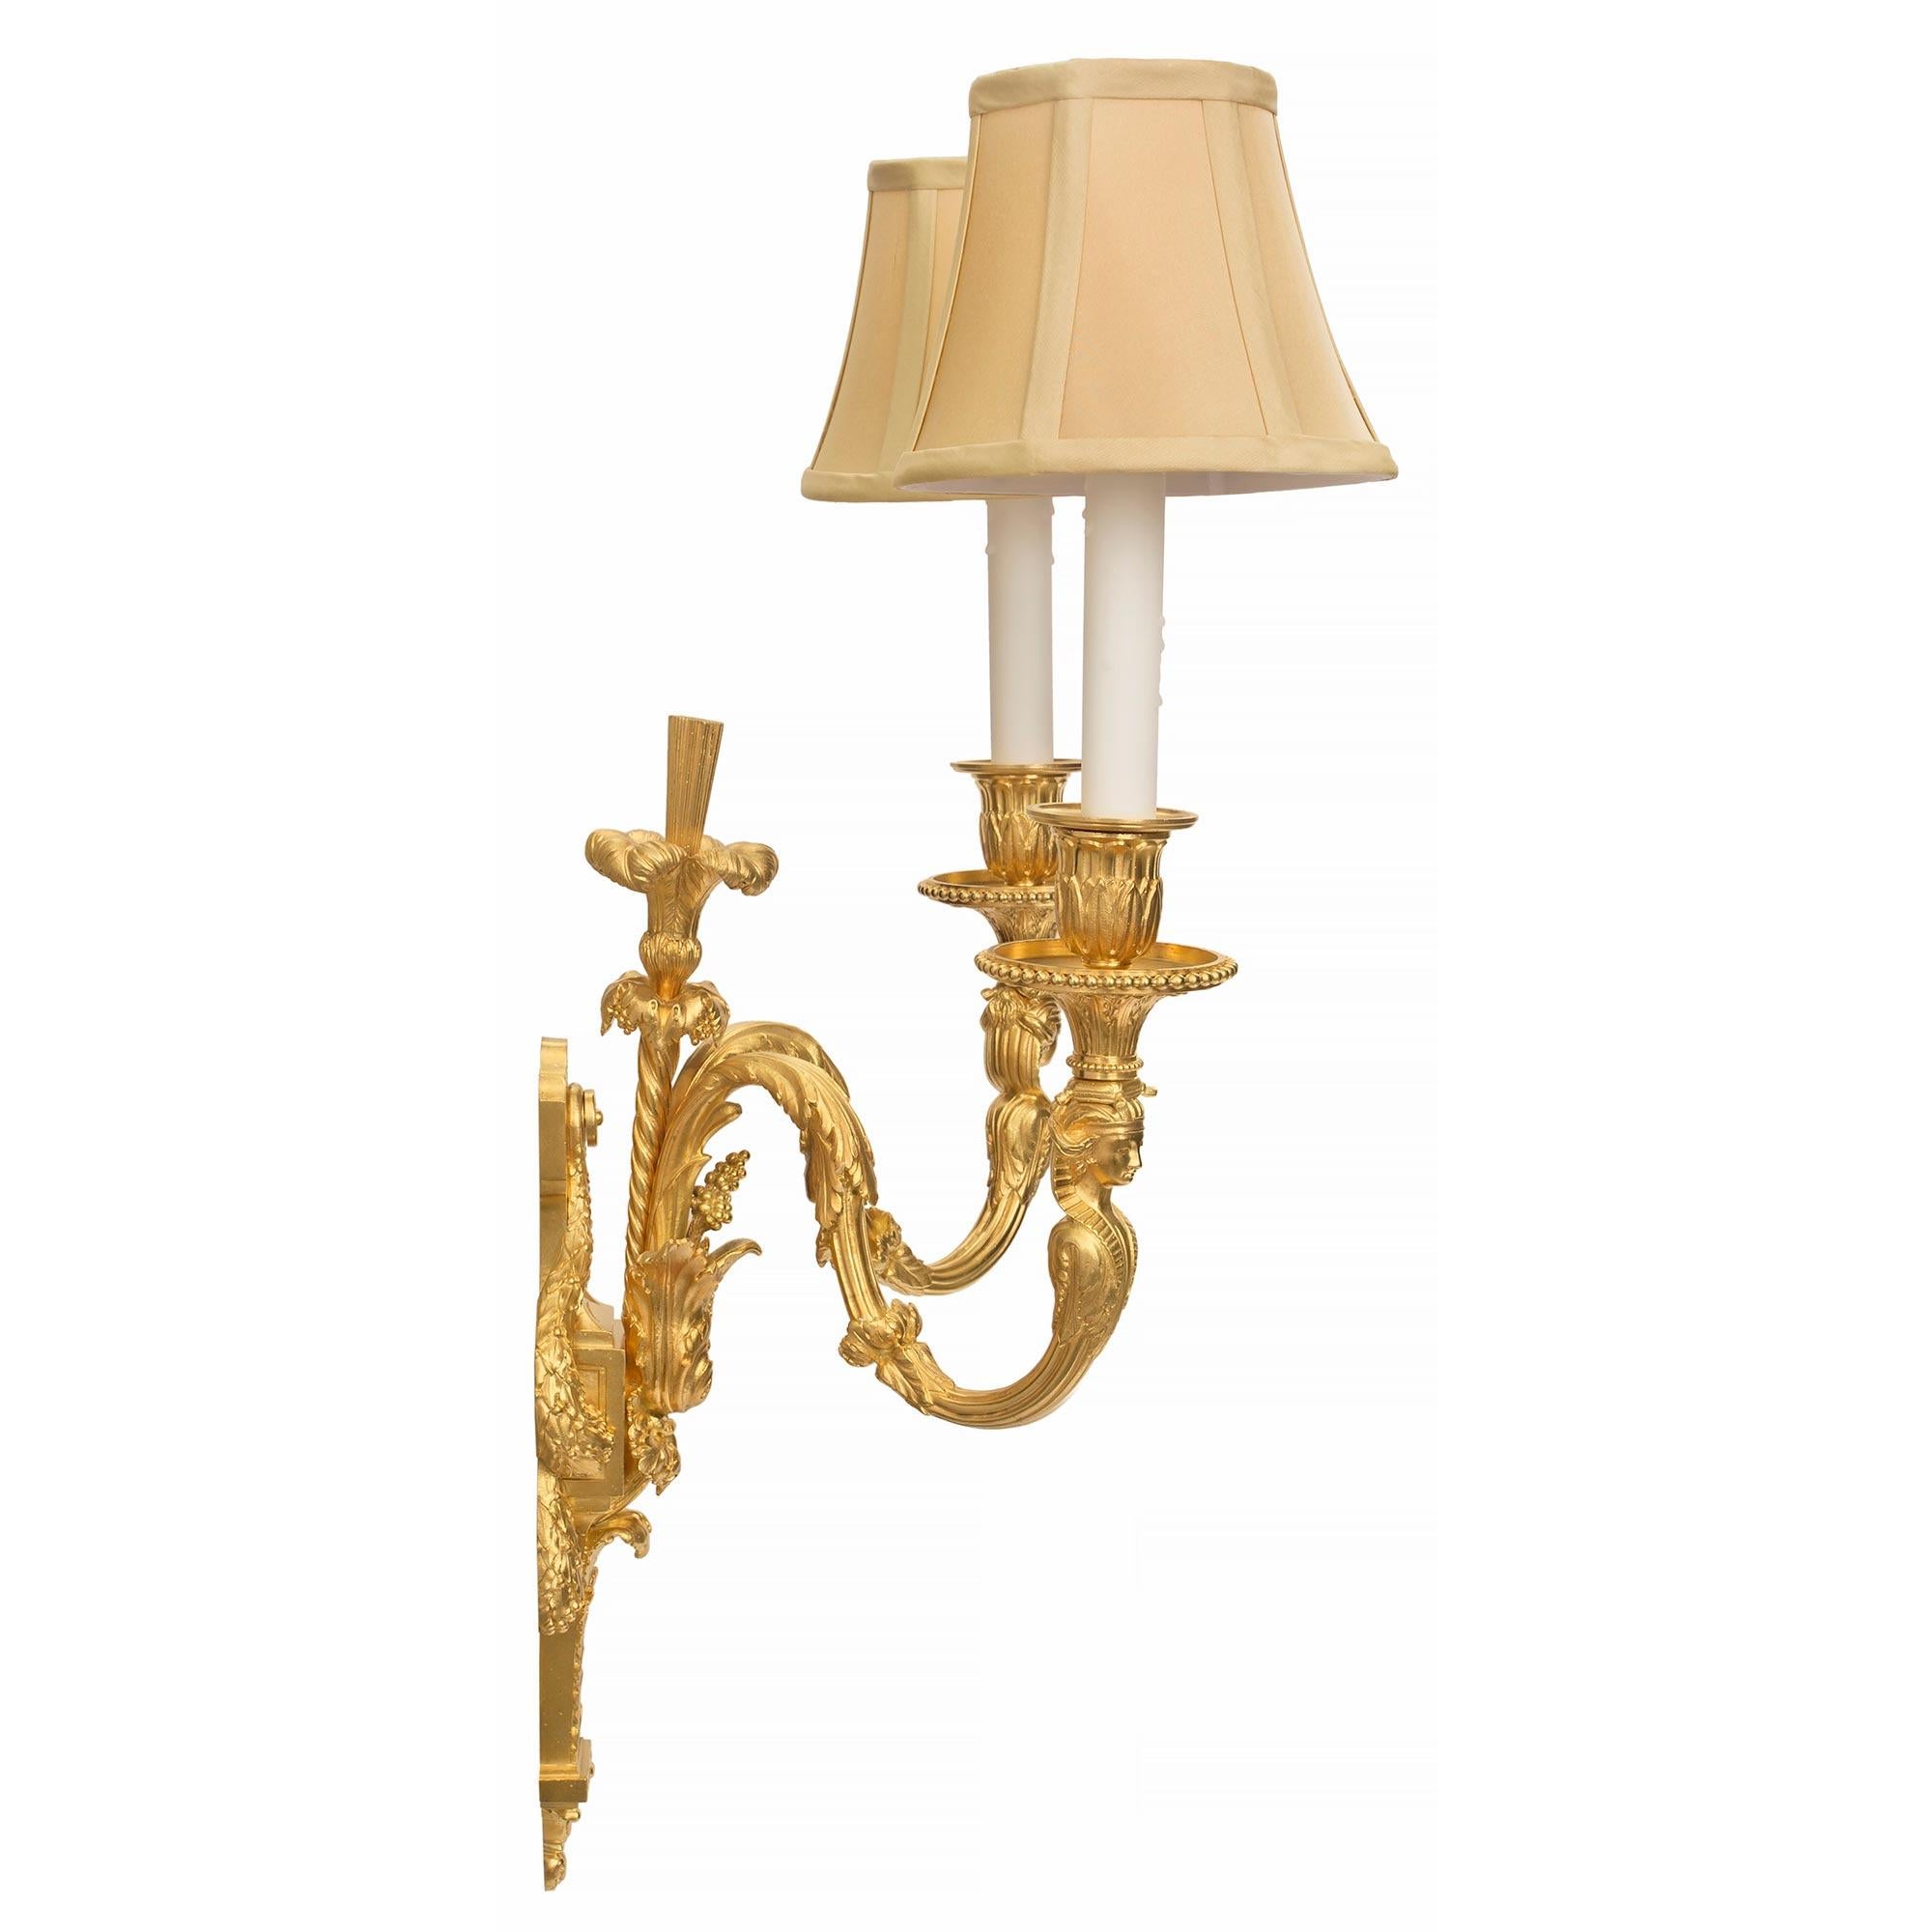 French 19th Century Louis XVI Style Two Arm Ormolu Sconces In Good Condition For Sale In West Palm Beach, FL